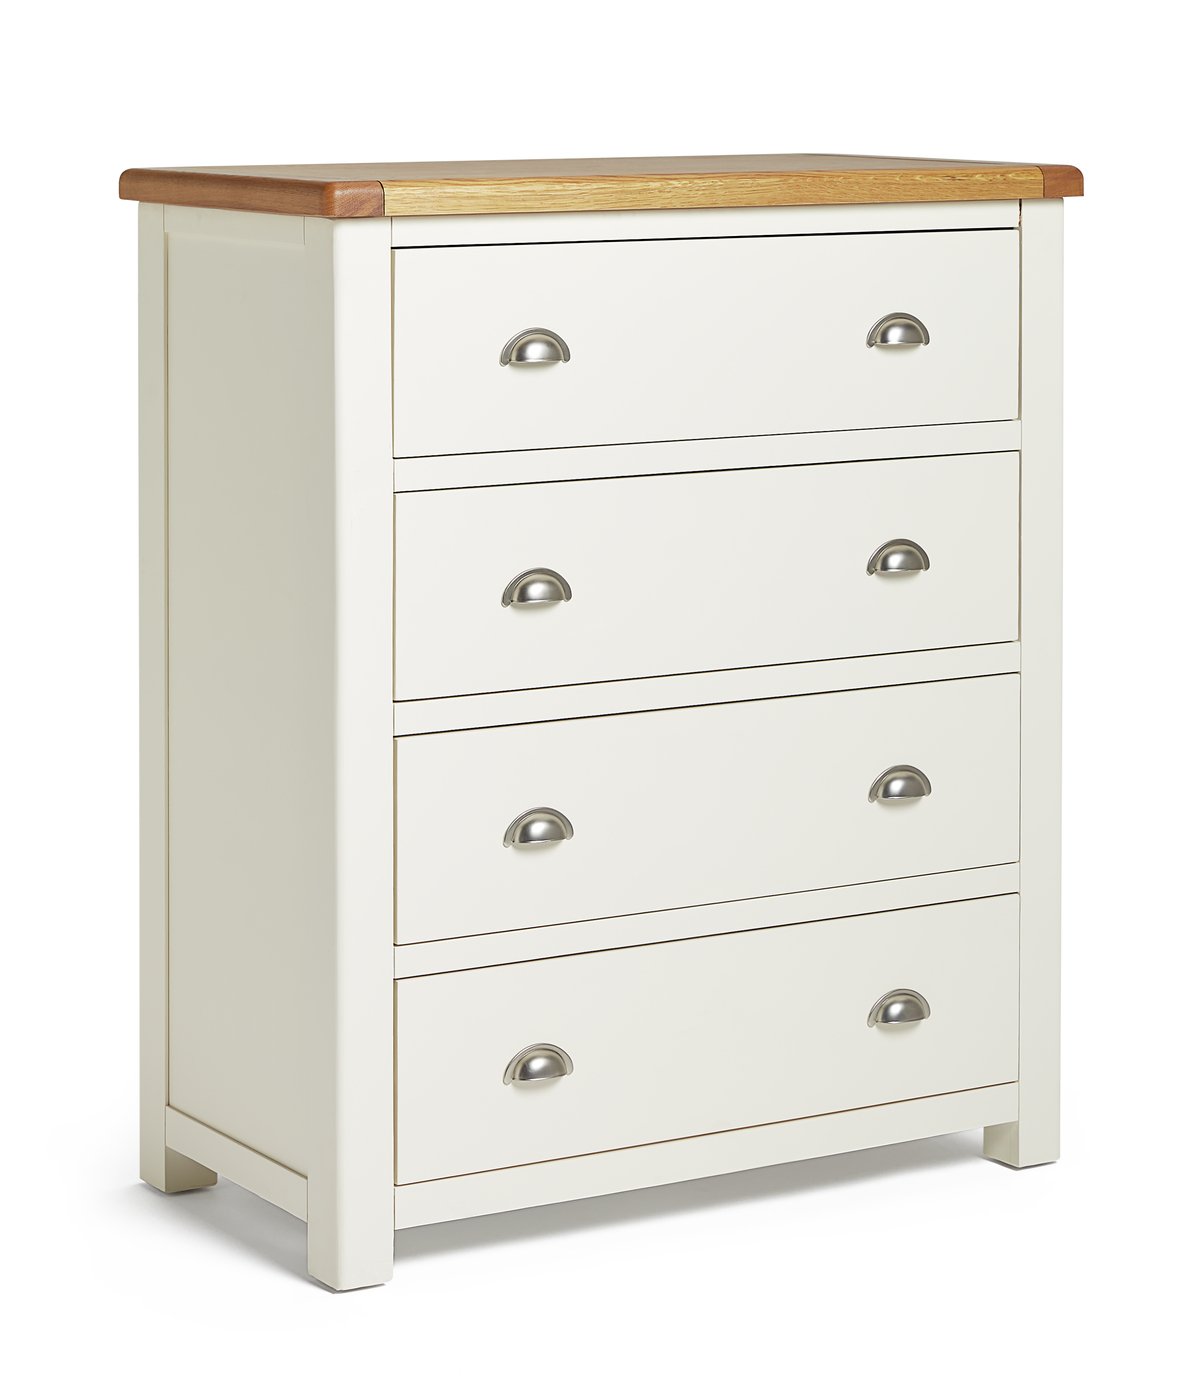 Argos Home Kent 4 Drawer Wide Chest review